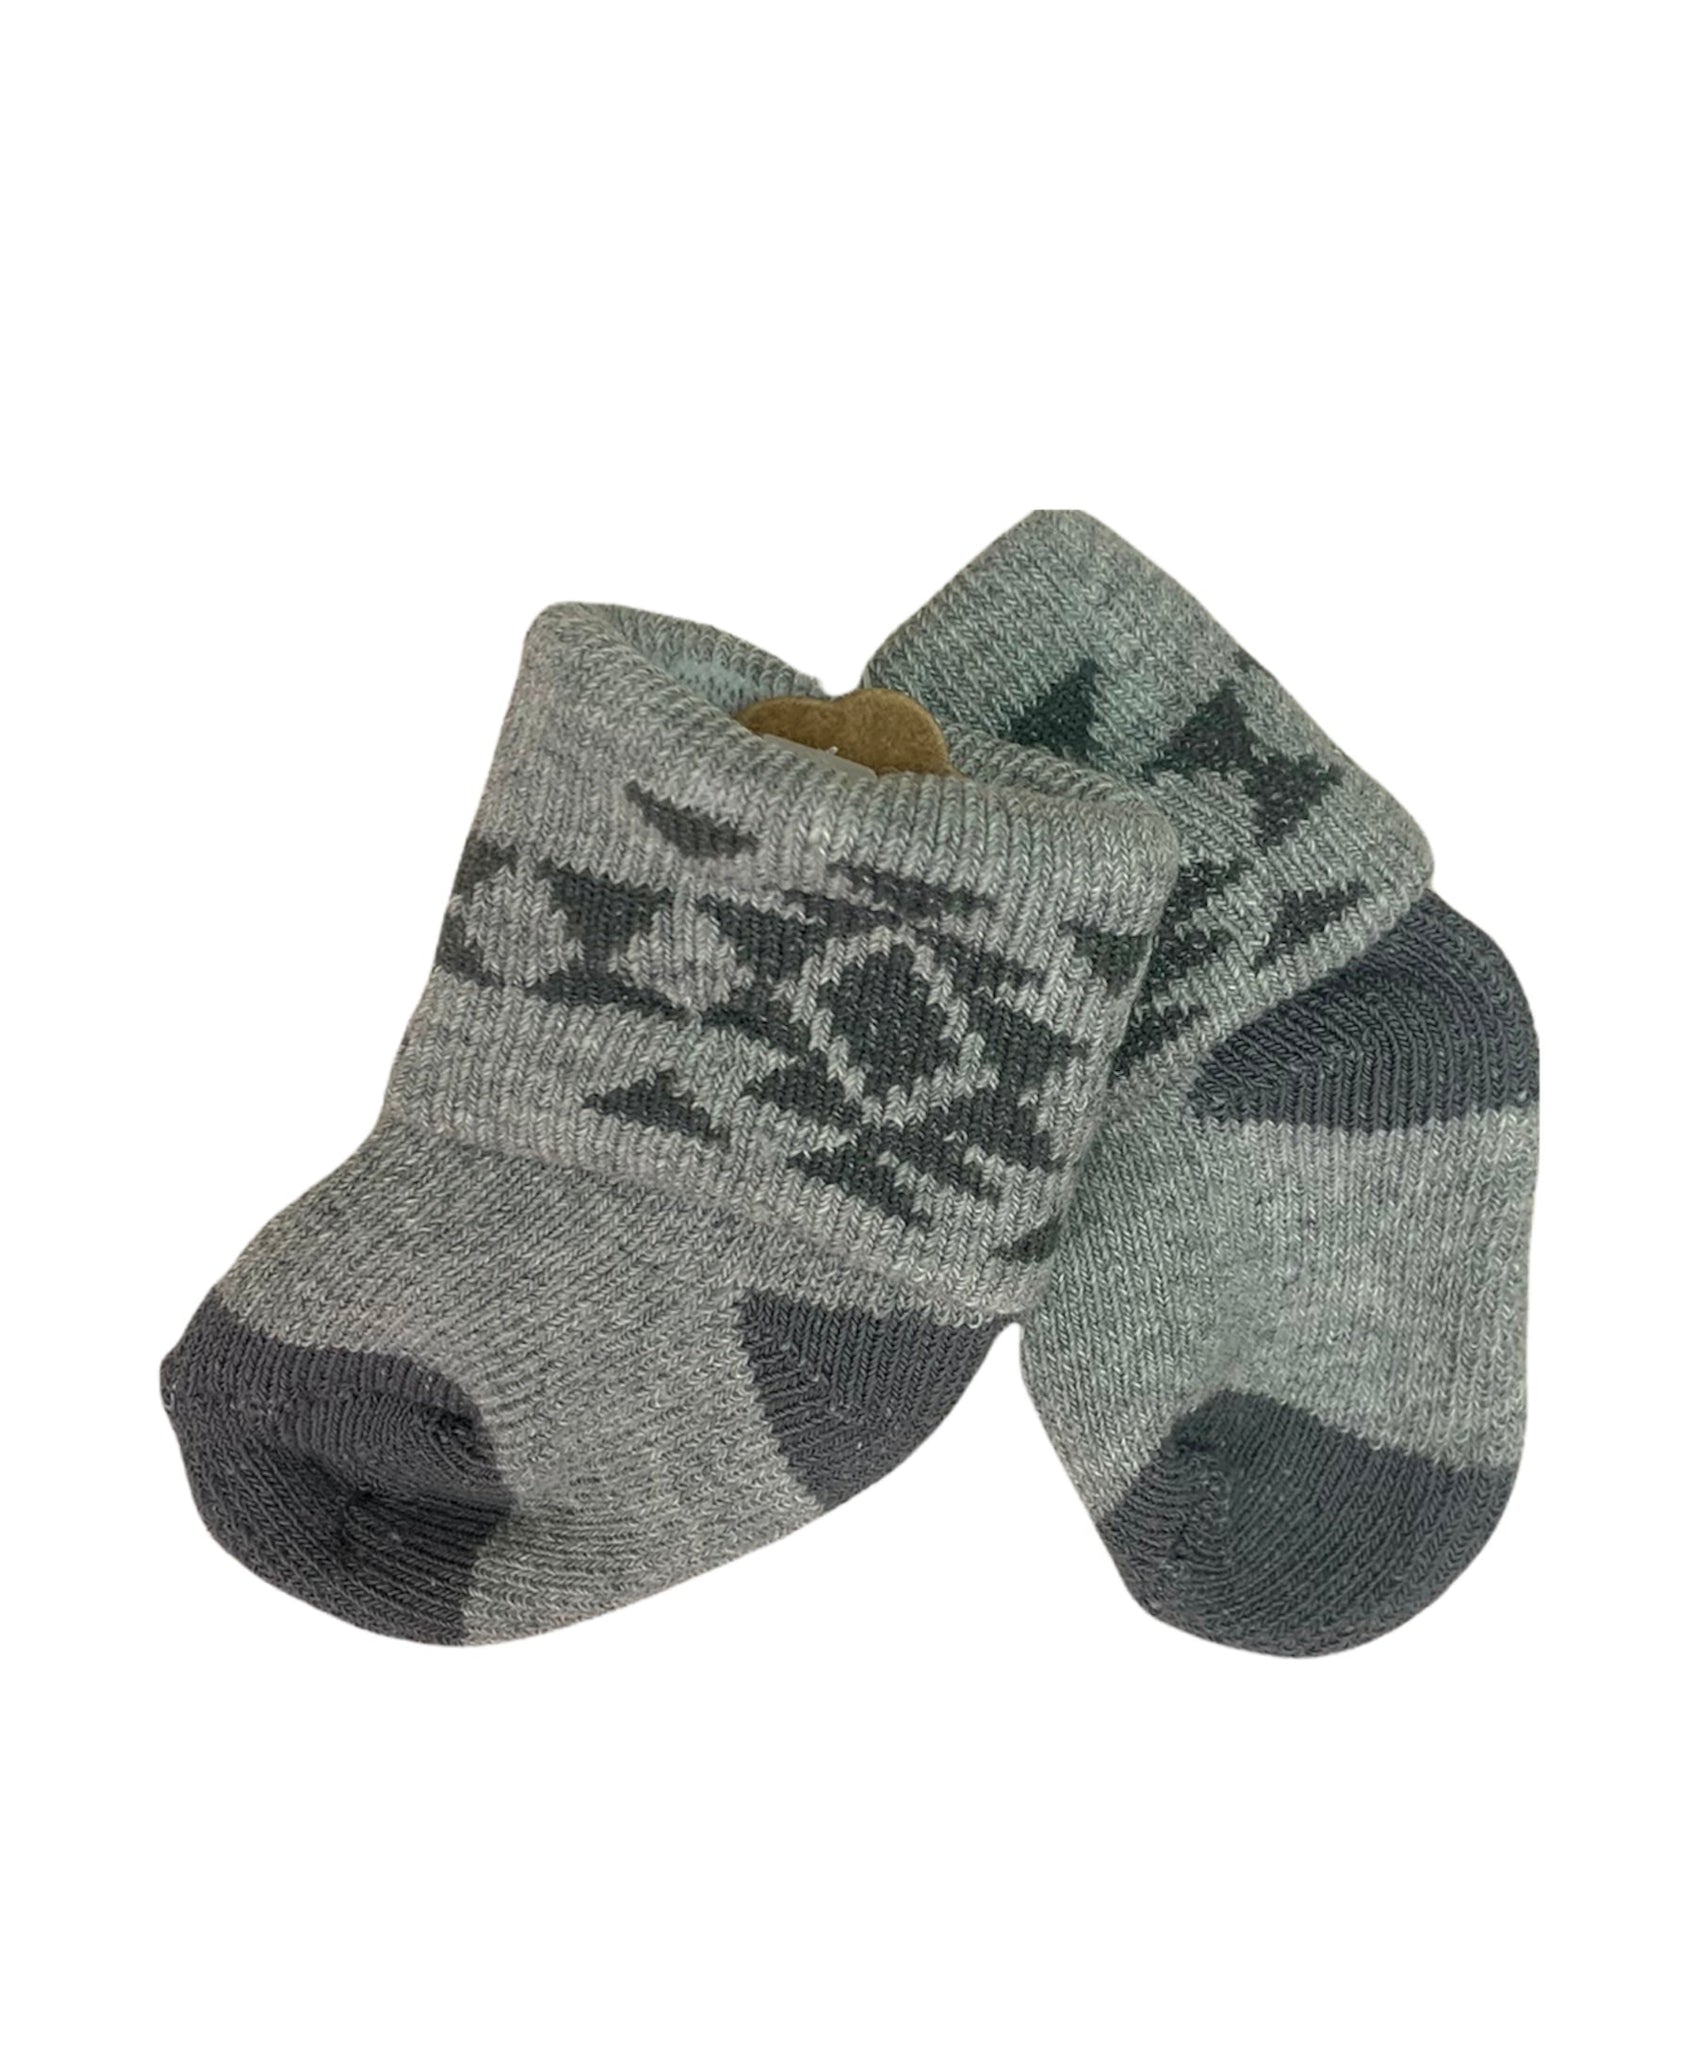 grey socks with tribal pattern on ankles, darker grey on heel and toe